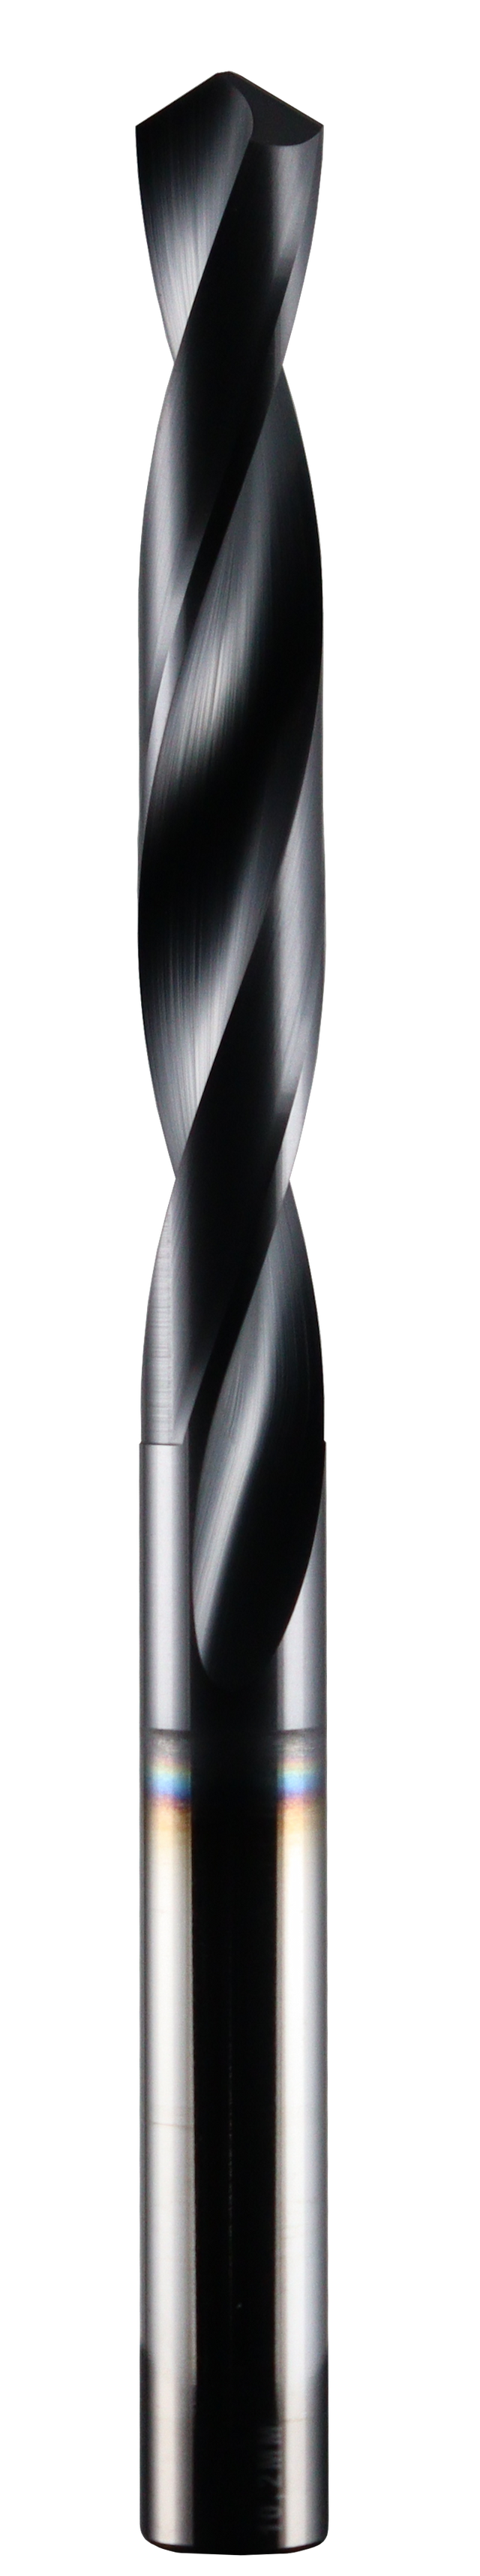 9.20mm Dia, 118 Degree Point, Solid Carbide Drill - 68359